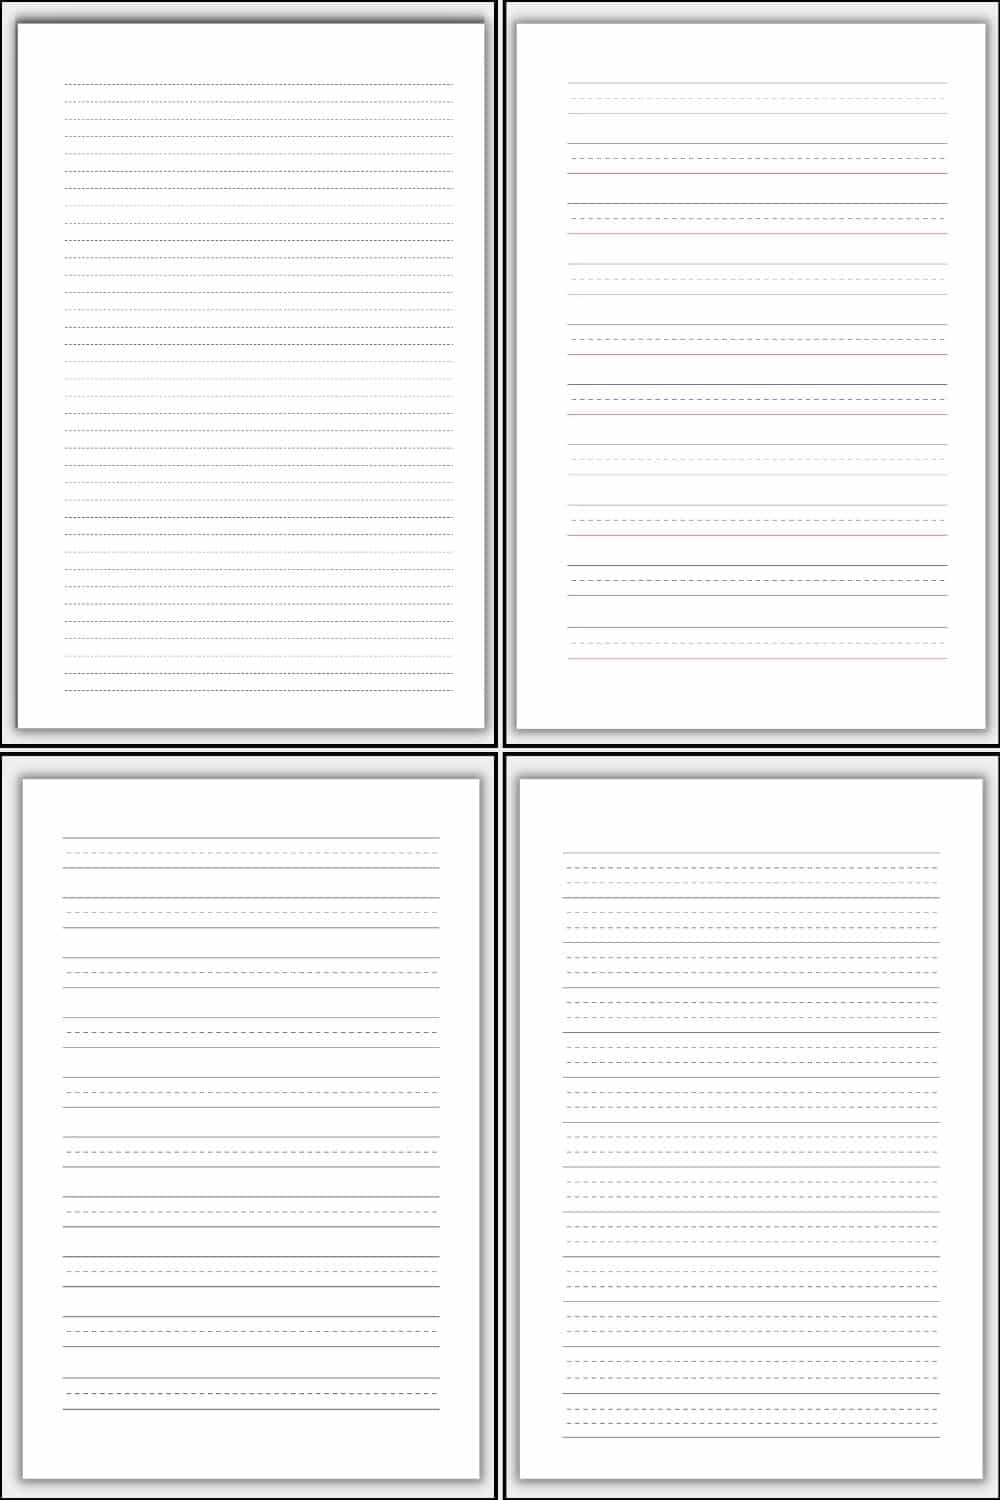 4 designs of dotted lined paper.